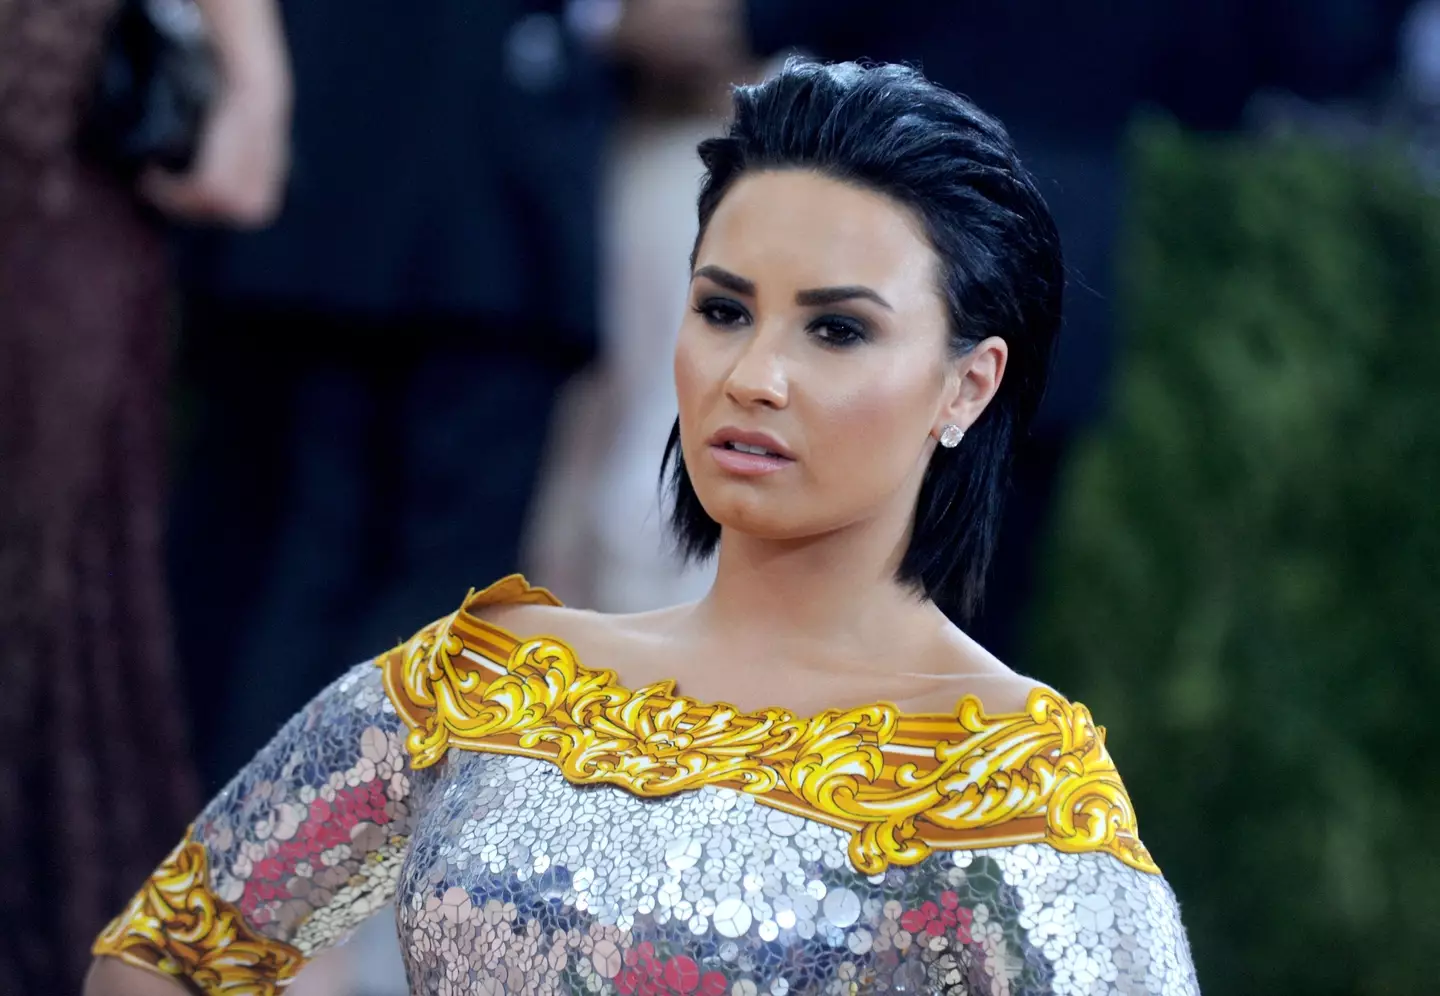 A poster advertising Demi Lovato's album has been banned in the UK.